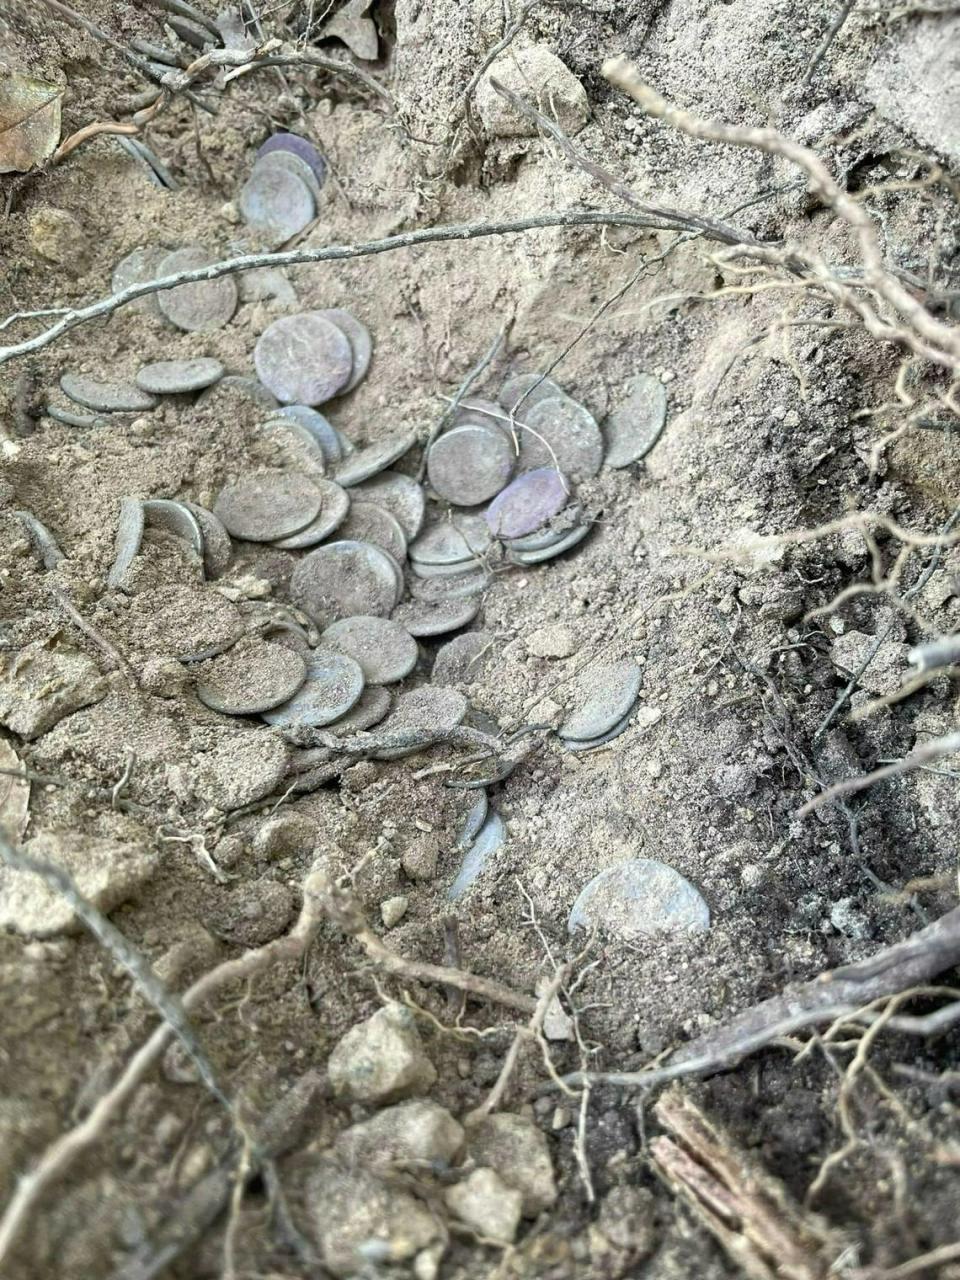 Some of the coins partially-buried in the dirt. Photo from the Superintendence of Archaeology, Fine Arts and Landscape for the provinces of Pisa and Livorno